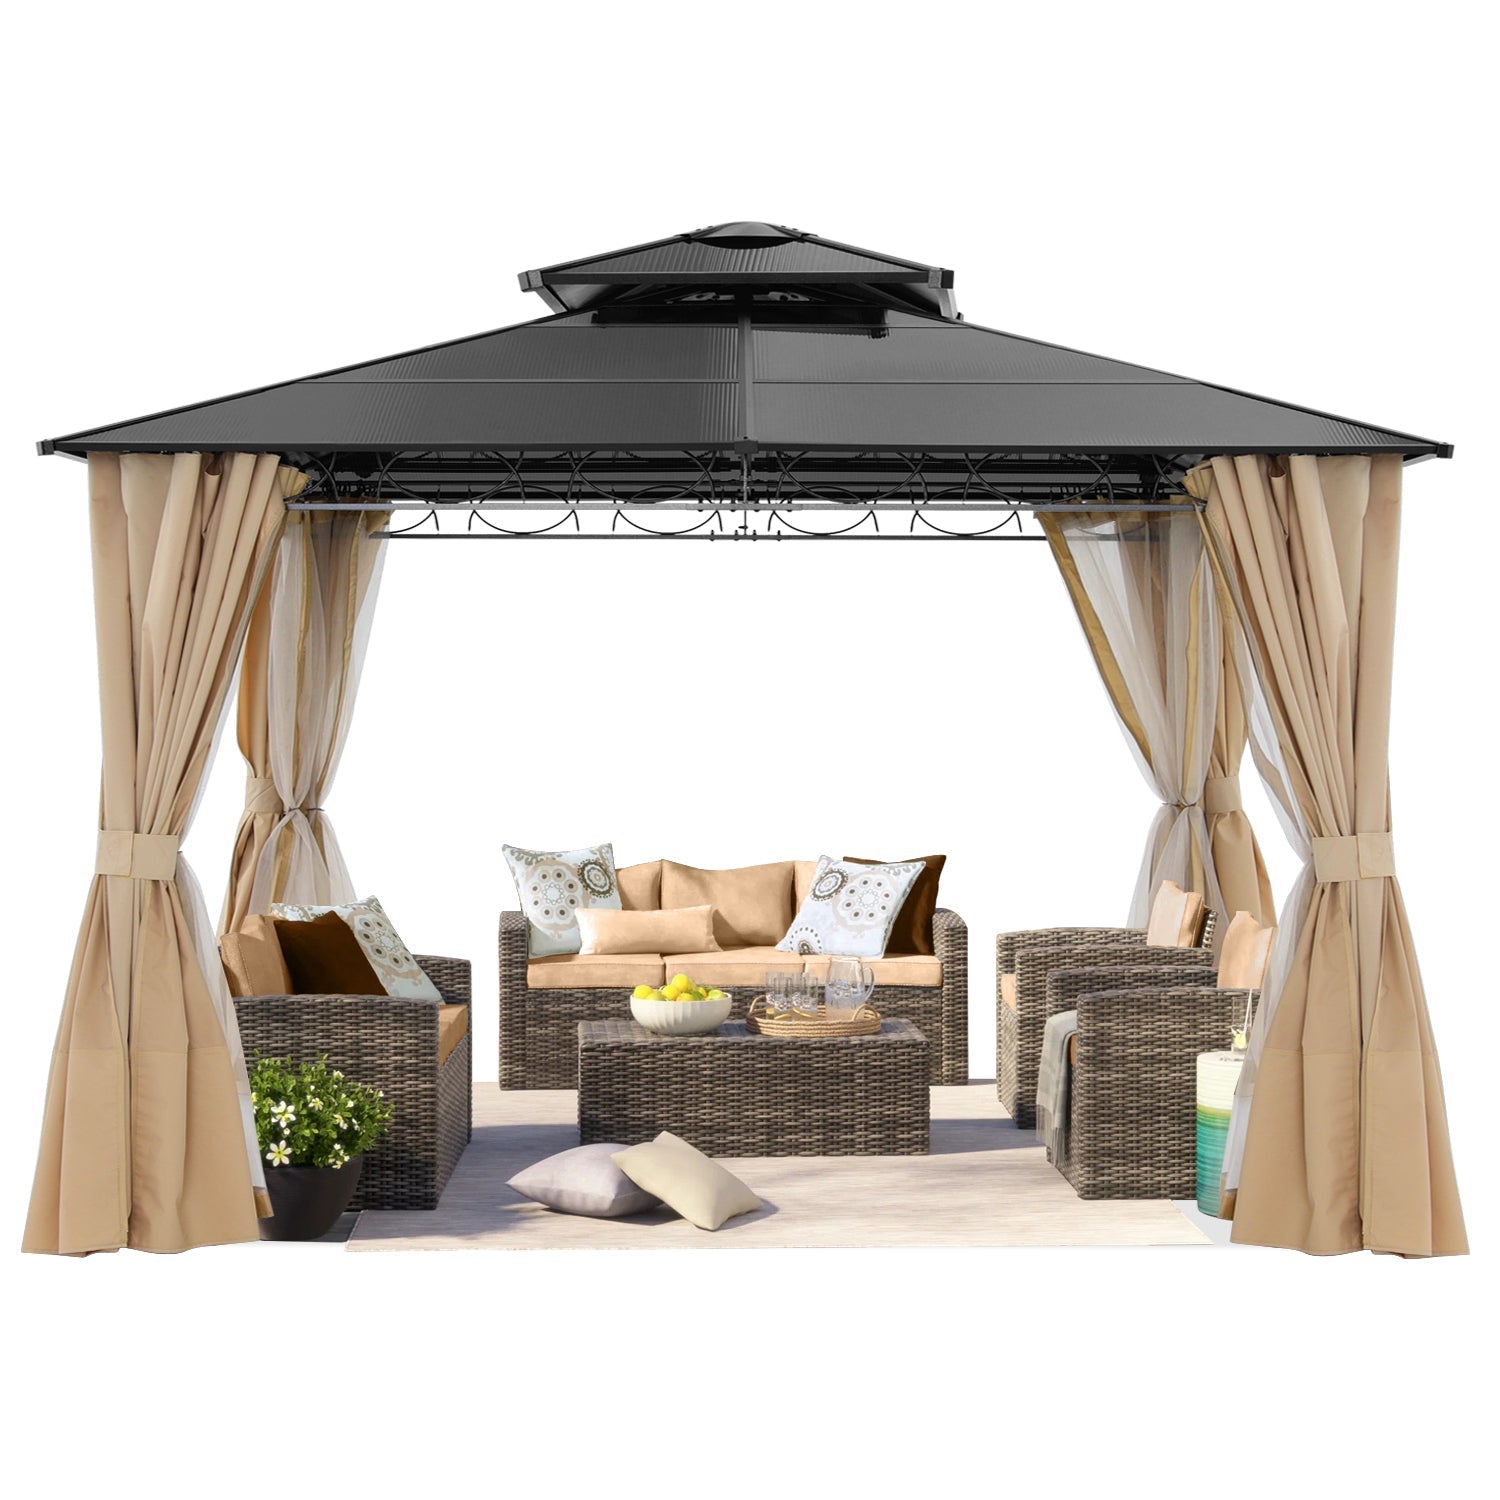 10x10/10x12 Steel Double Roof Hardtop Gazebo with Privacy Curtains and Netting